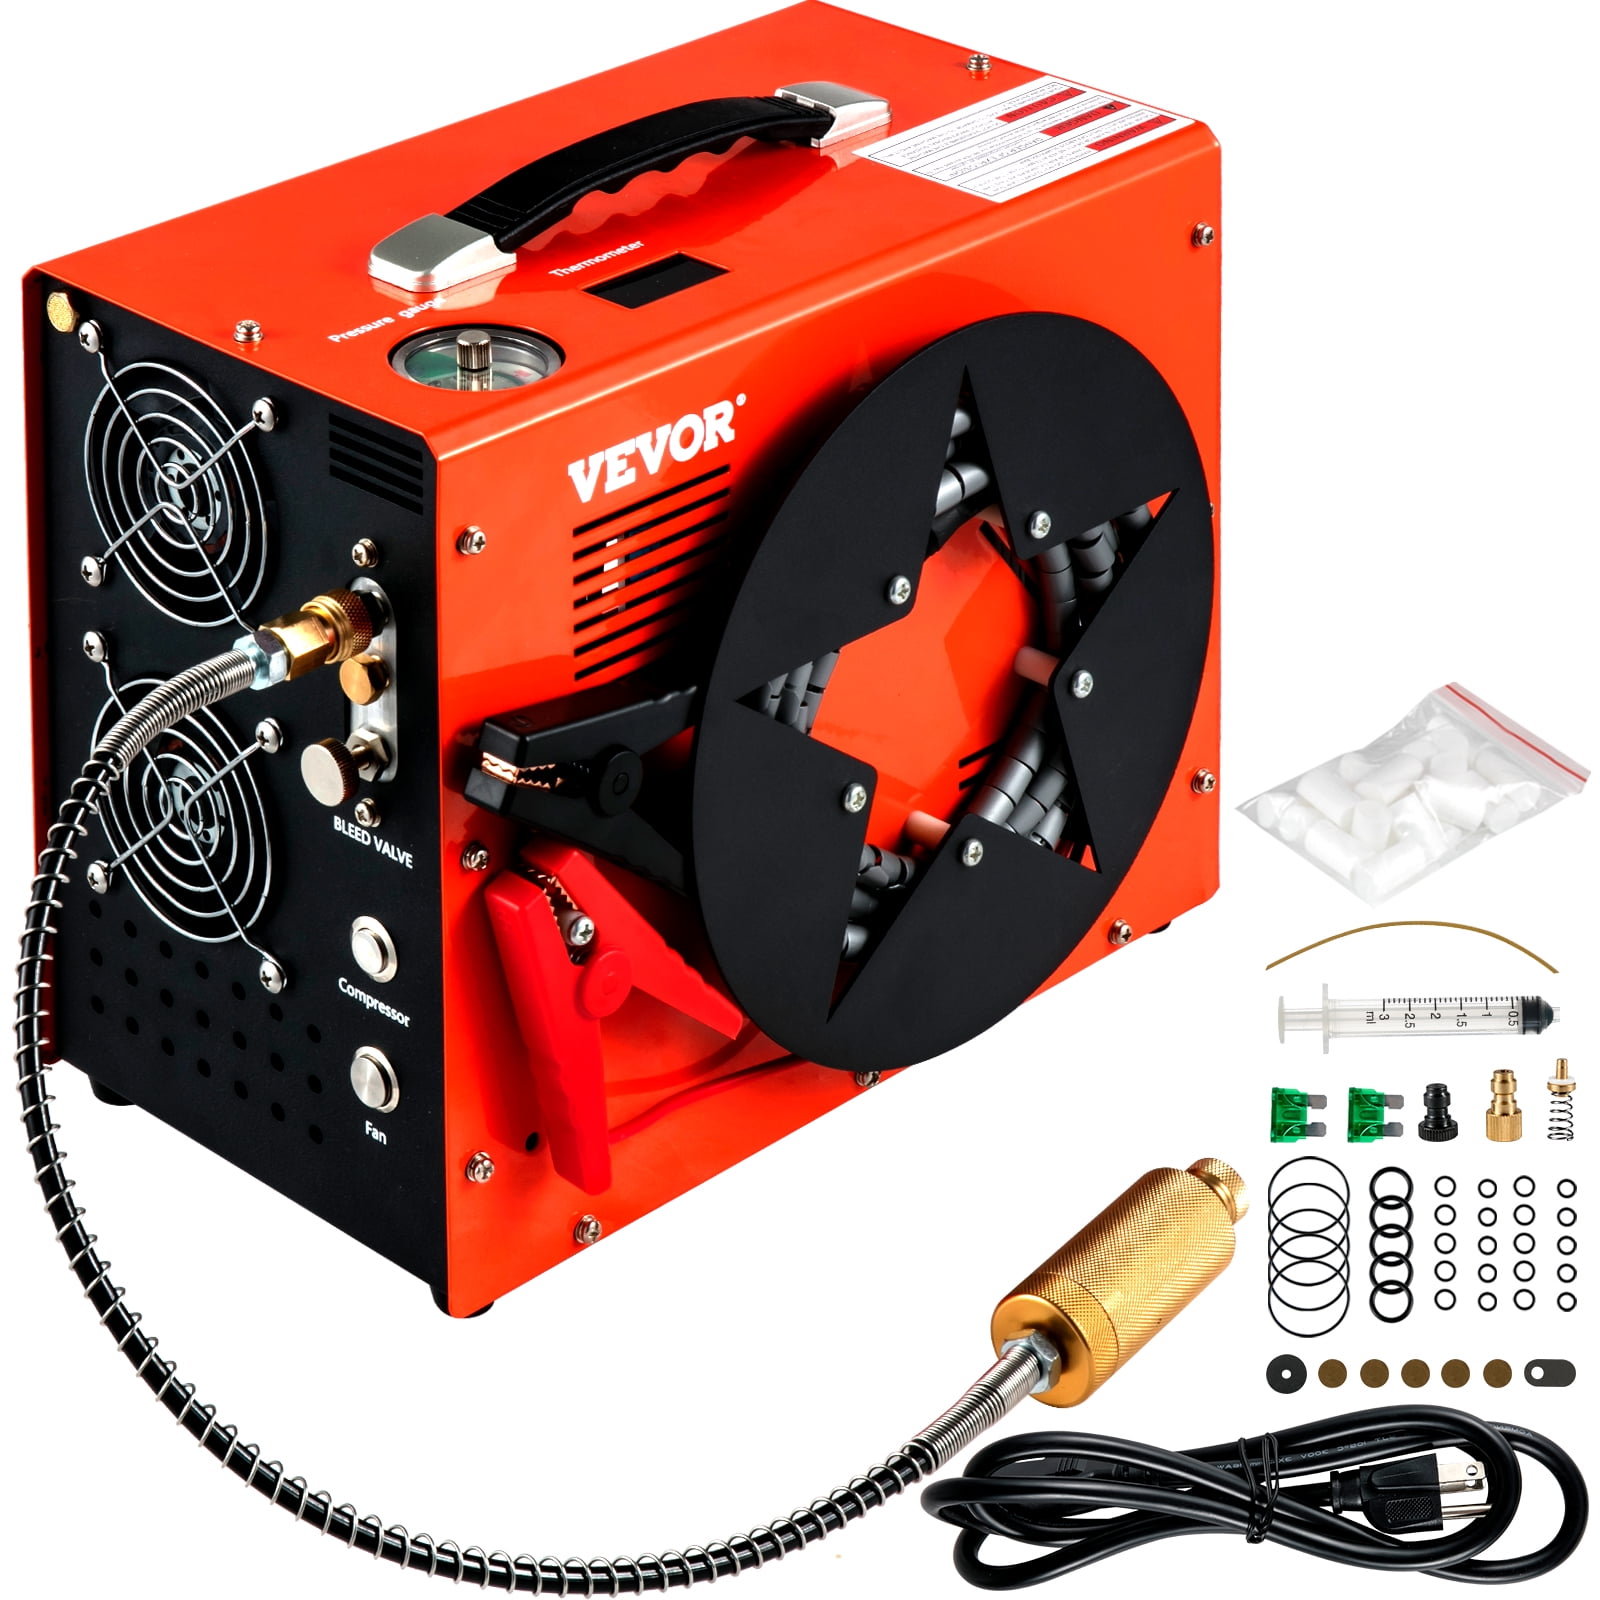 VEVOR PCP Air Compressor,4500Psi Portable PCP Compressor,12V DC 110V/220V AC PCP Airgun Compressor Auto-stop,with Built-In Adapter,Fan Cooling,Wire